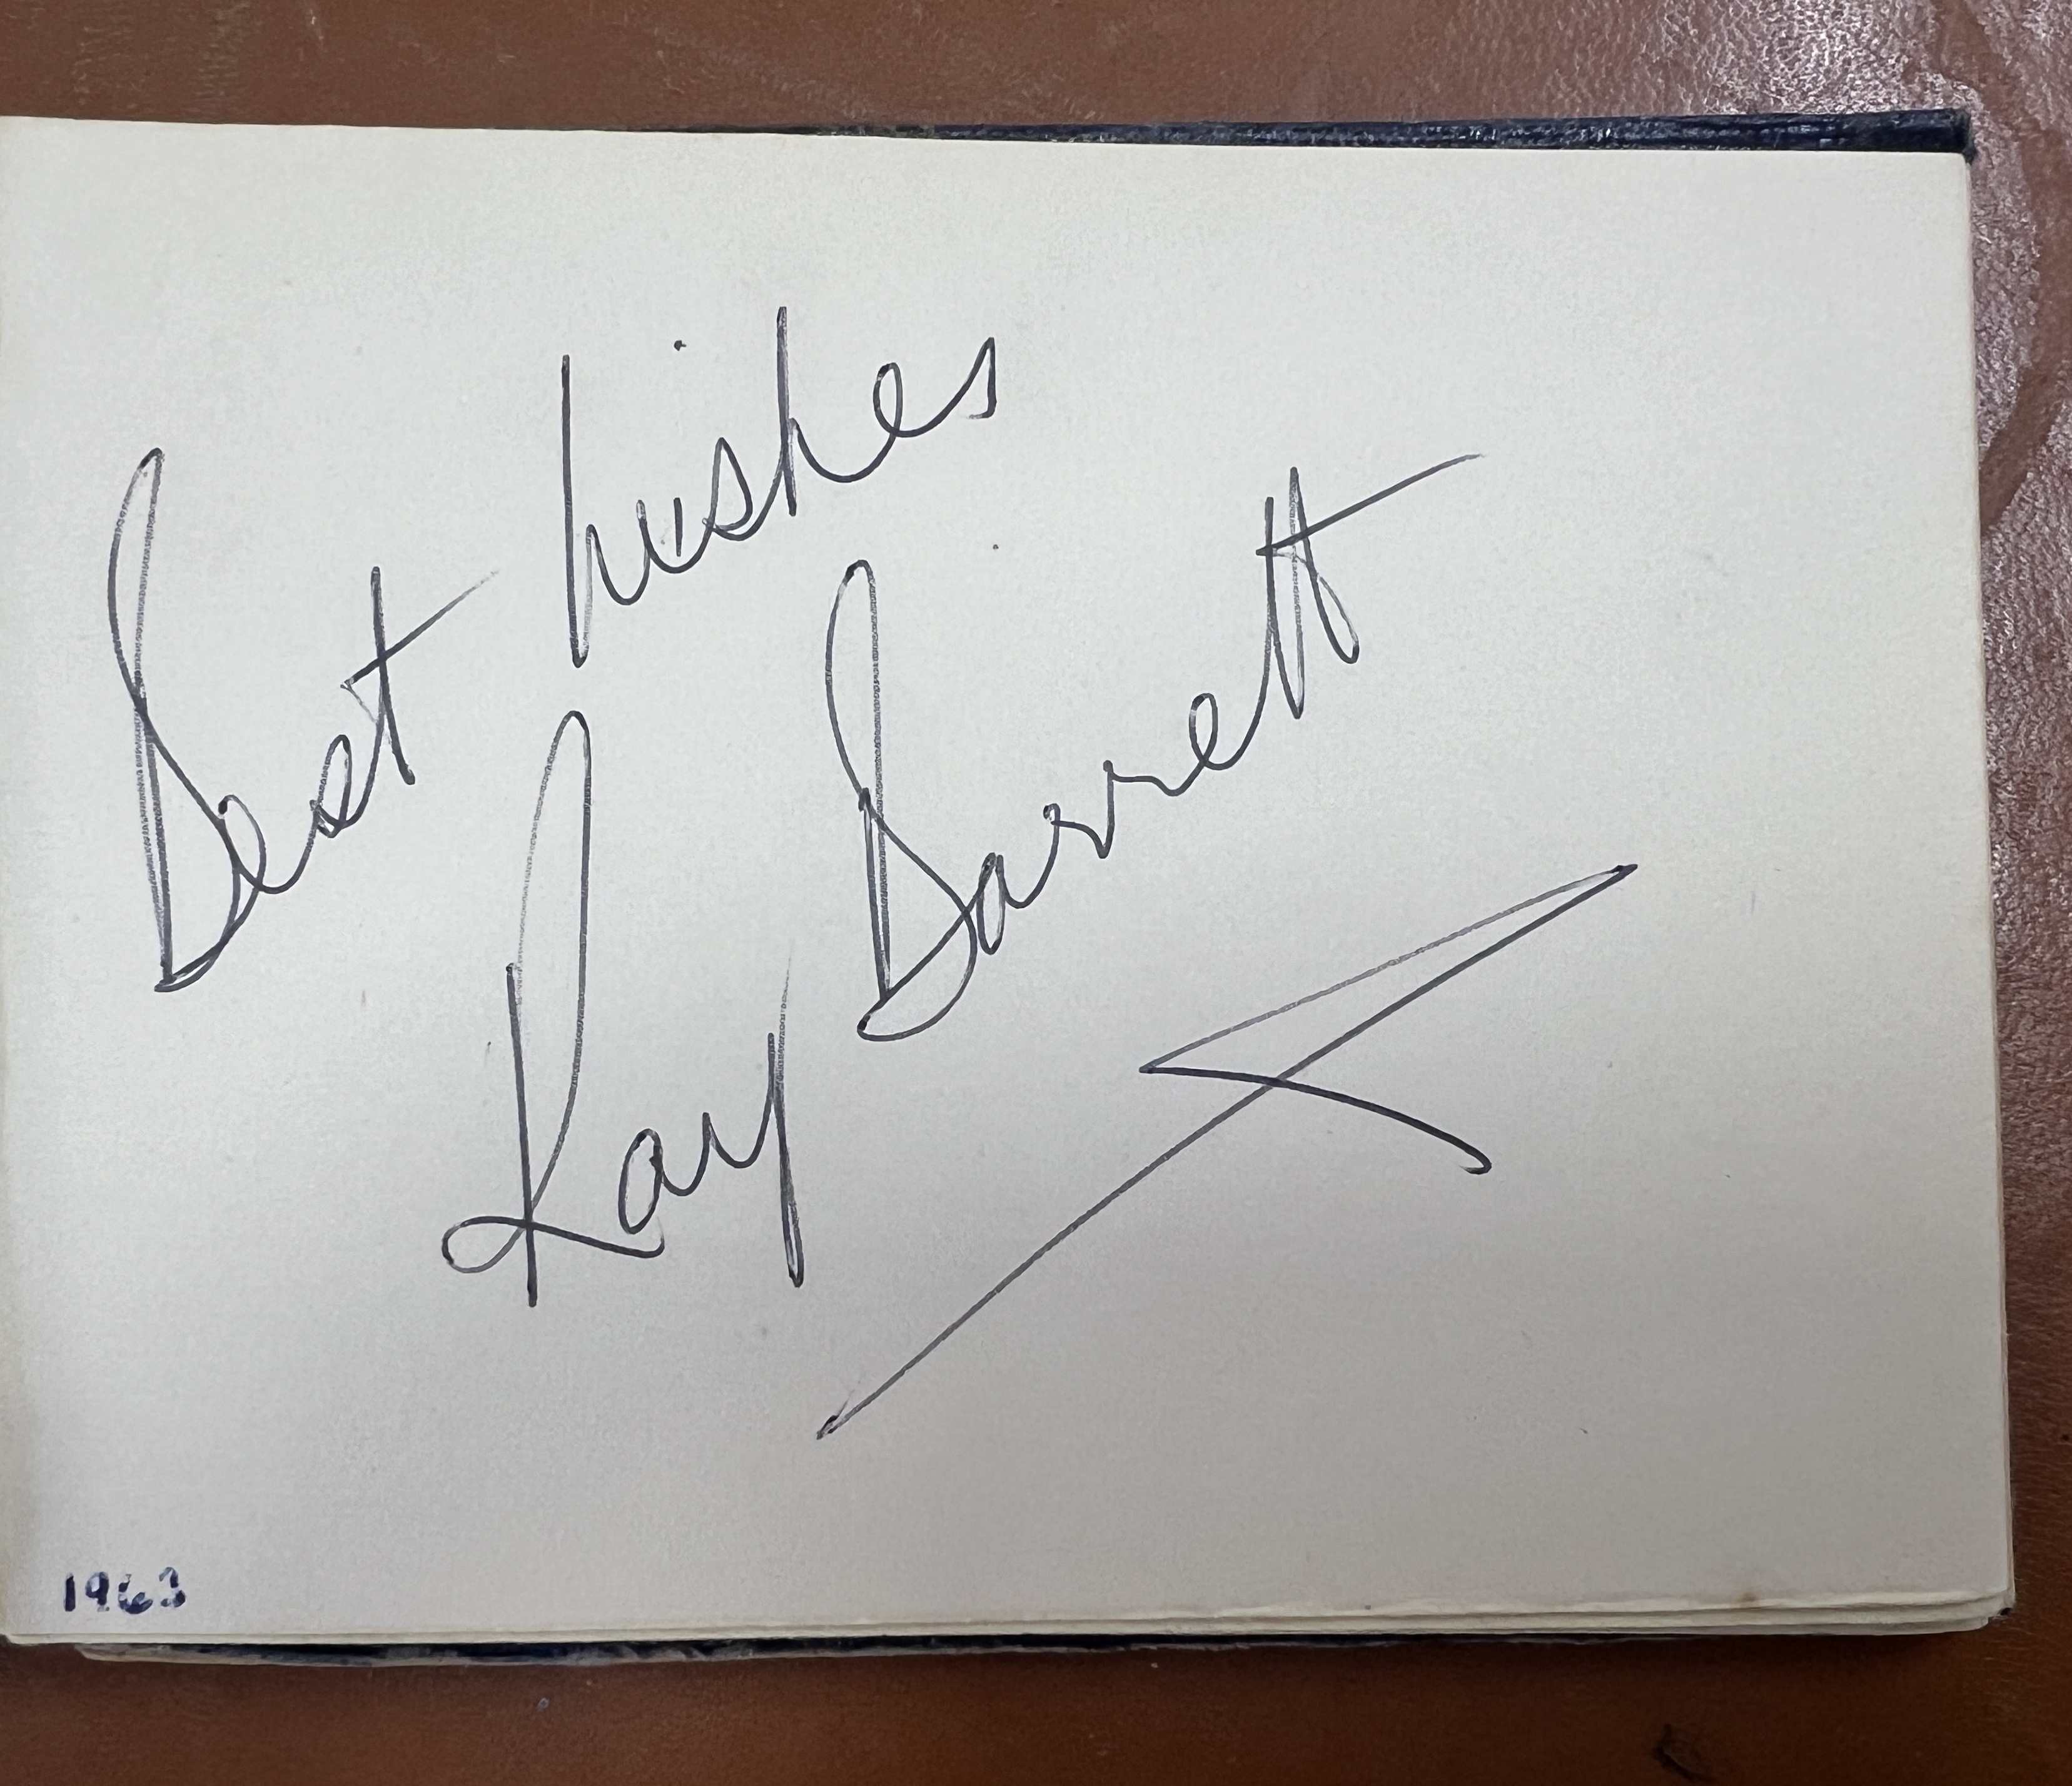 A 1960's autograph album containing autographs of various celebrities including Cliff Richard, - Image 16 of 37